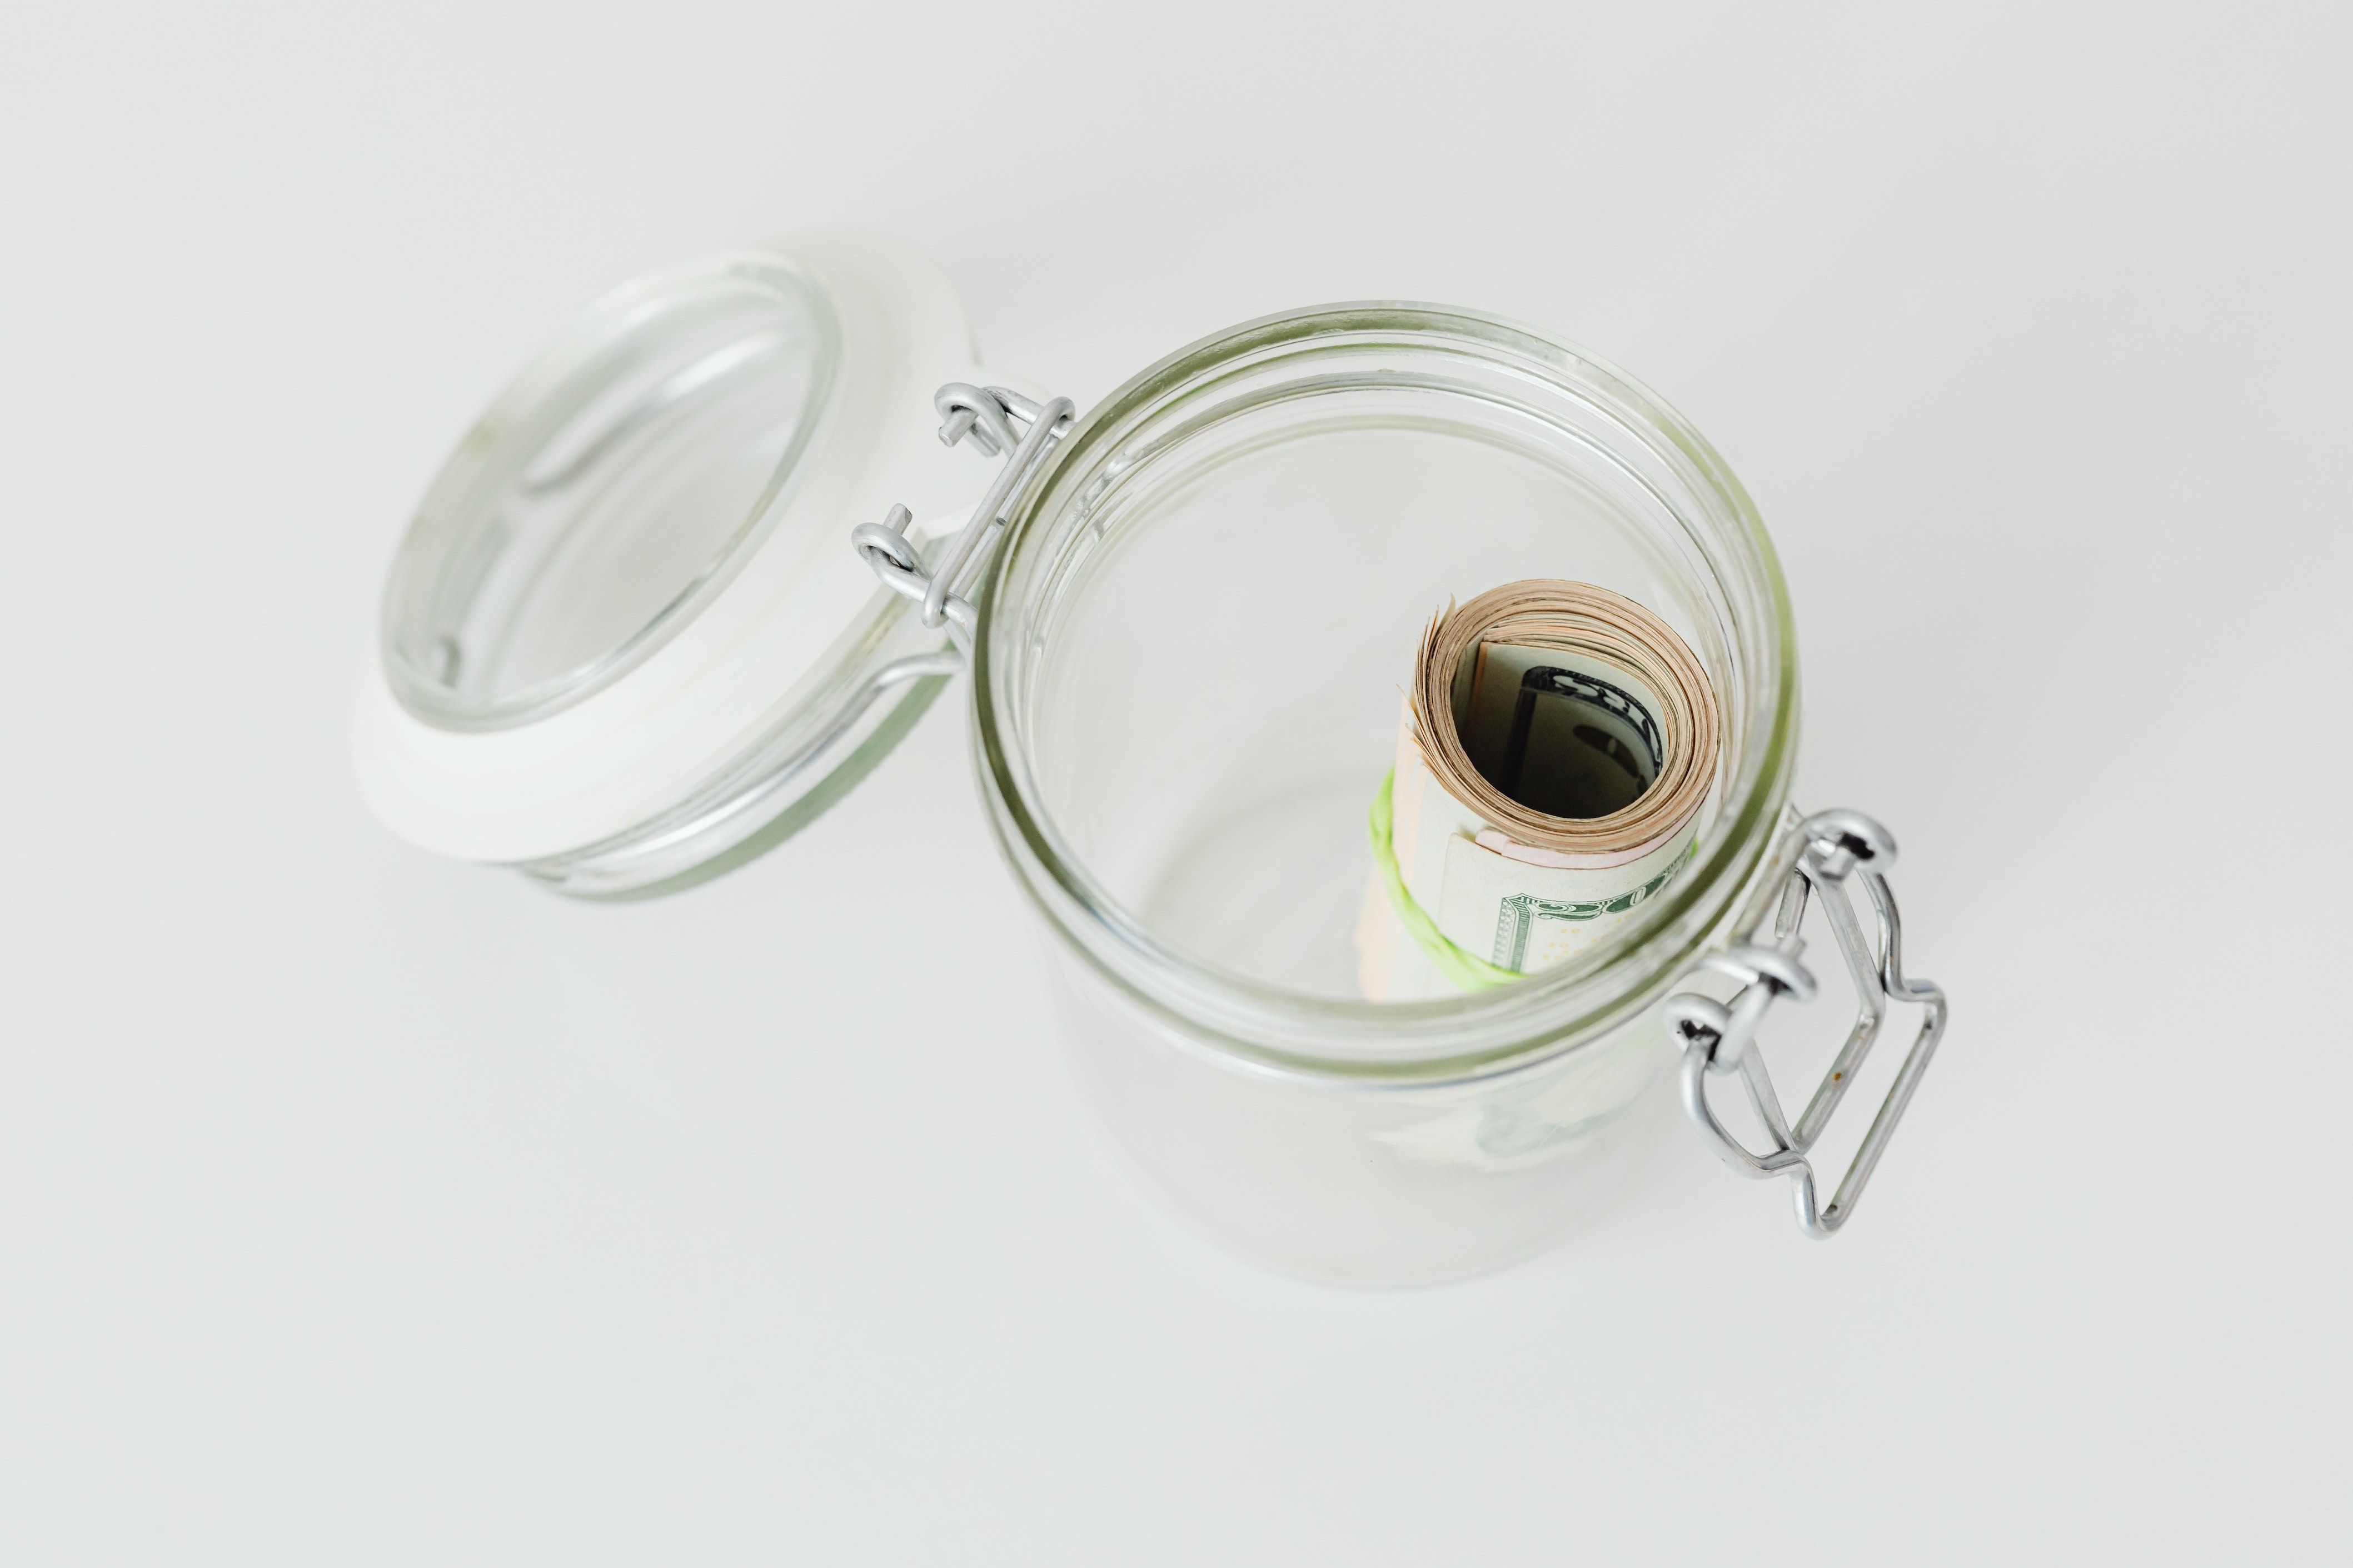 Roll of bills in open glass jar, on a white surface